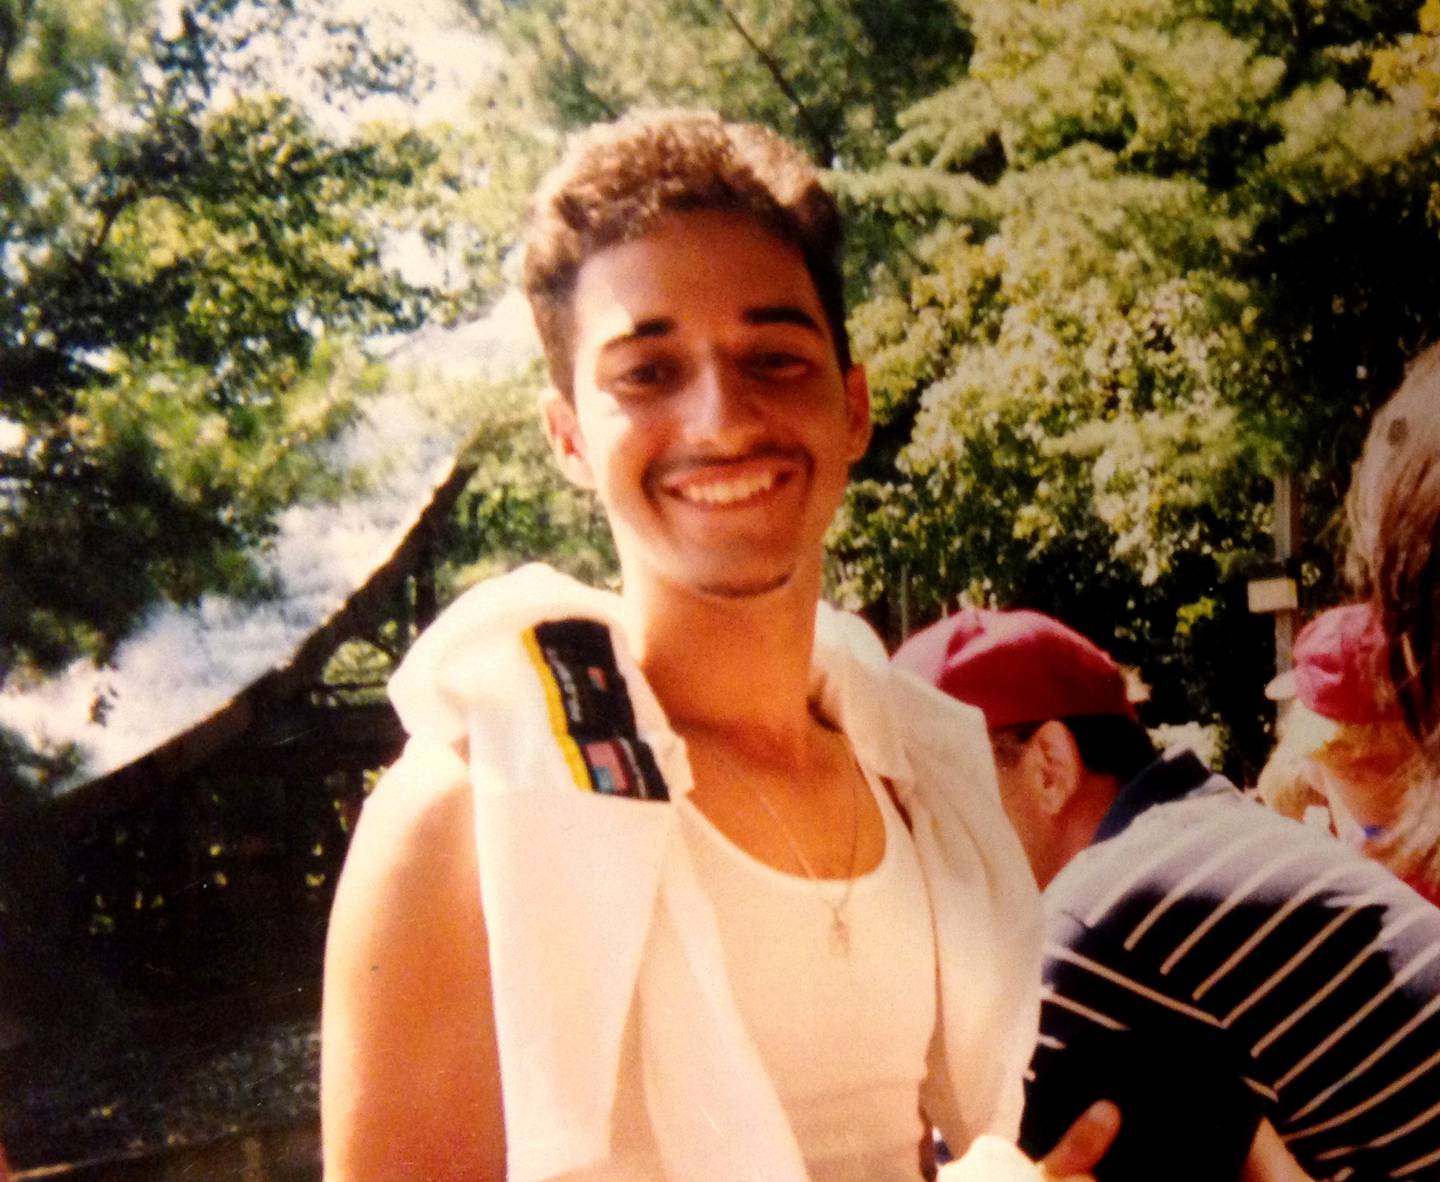 A photo of Adnan Syed from 1998.